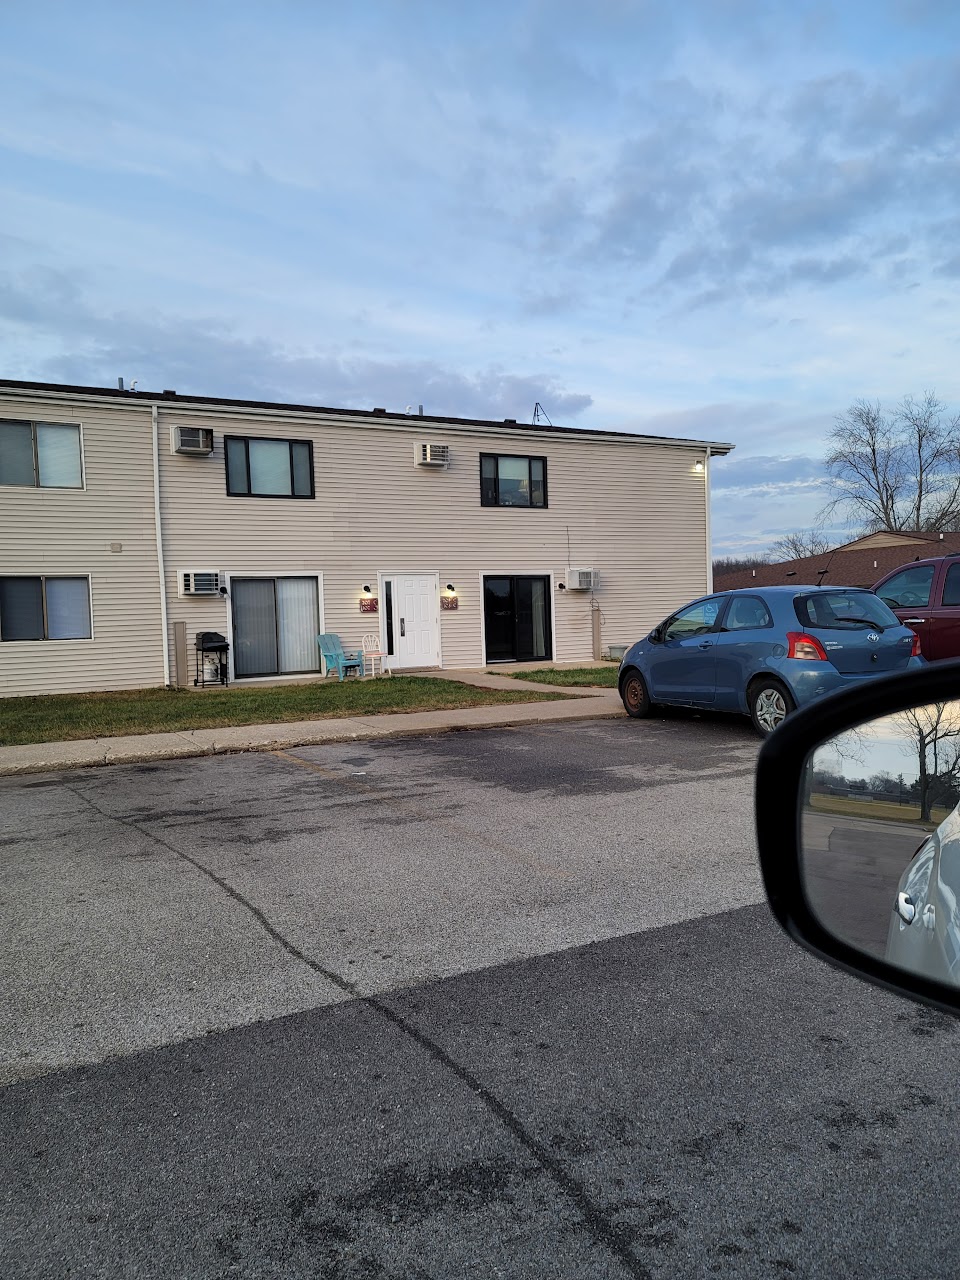 Photo of VILLAGE SQUARE II. Affordable housing located at 1624 E MYRTLE ST CANTON, IL 61520